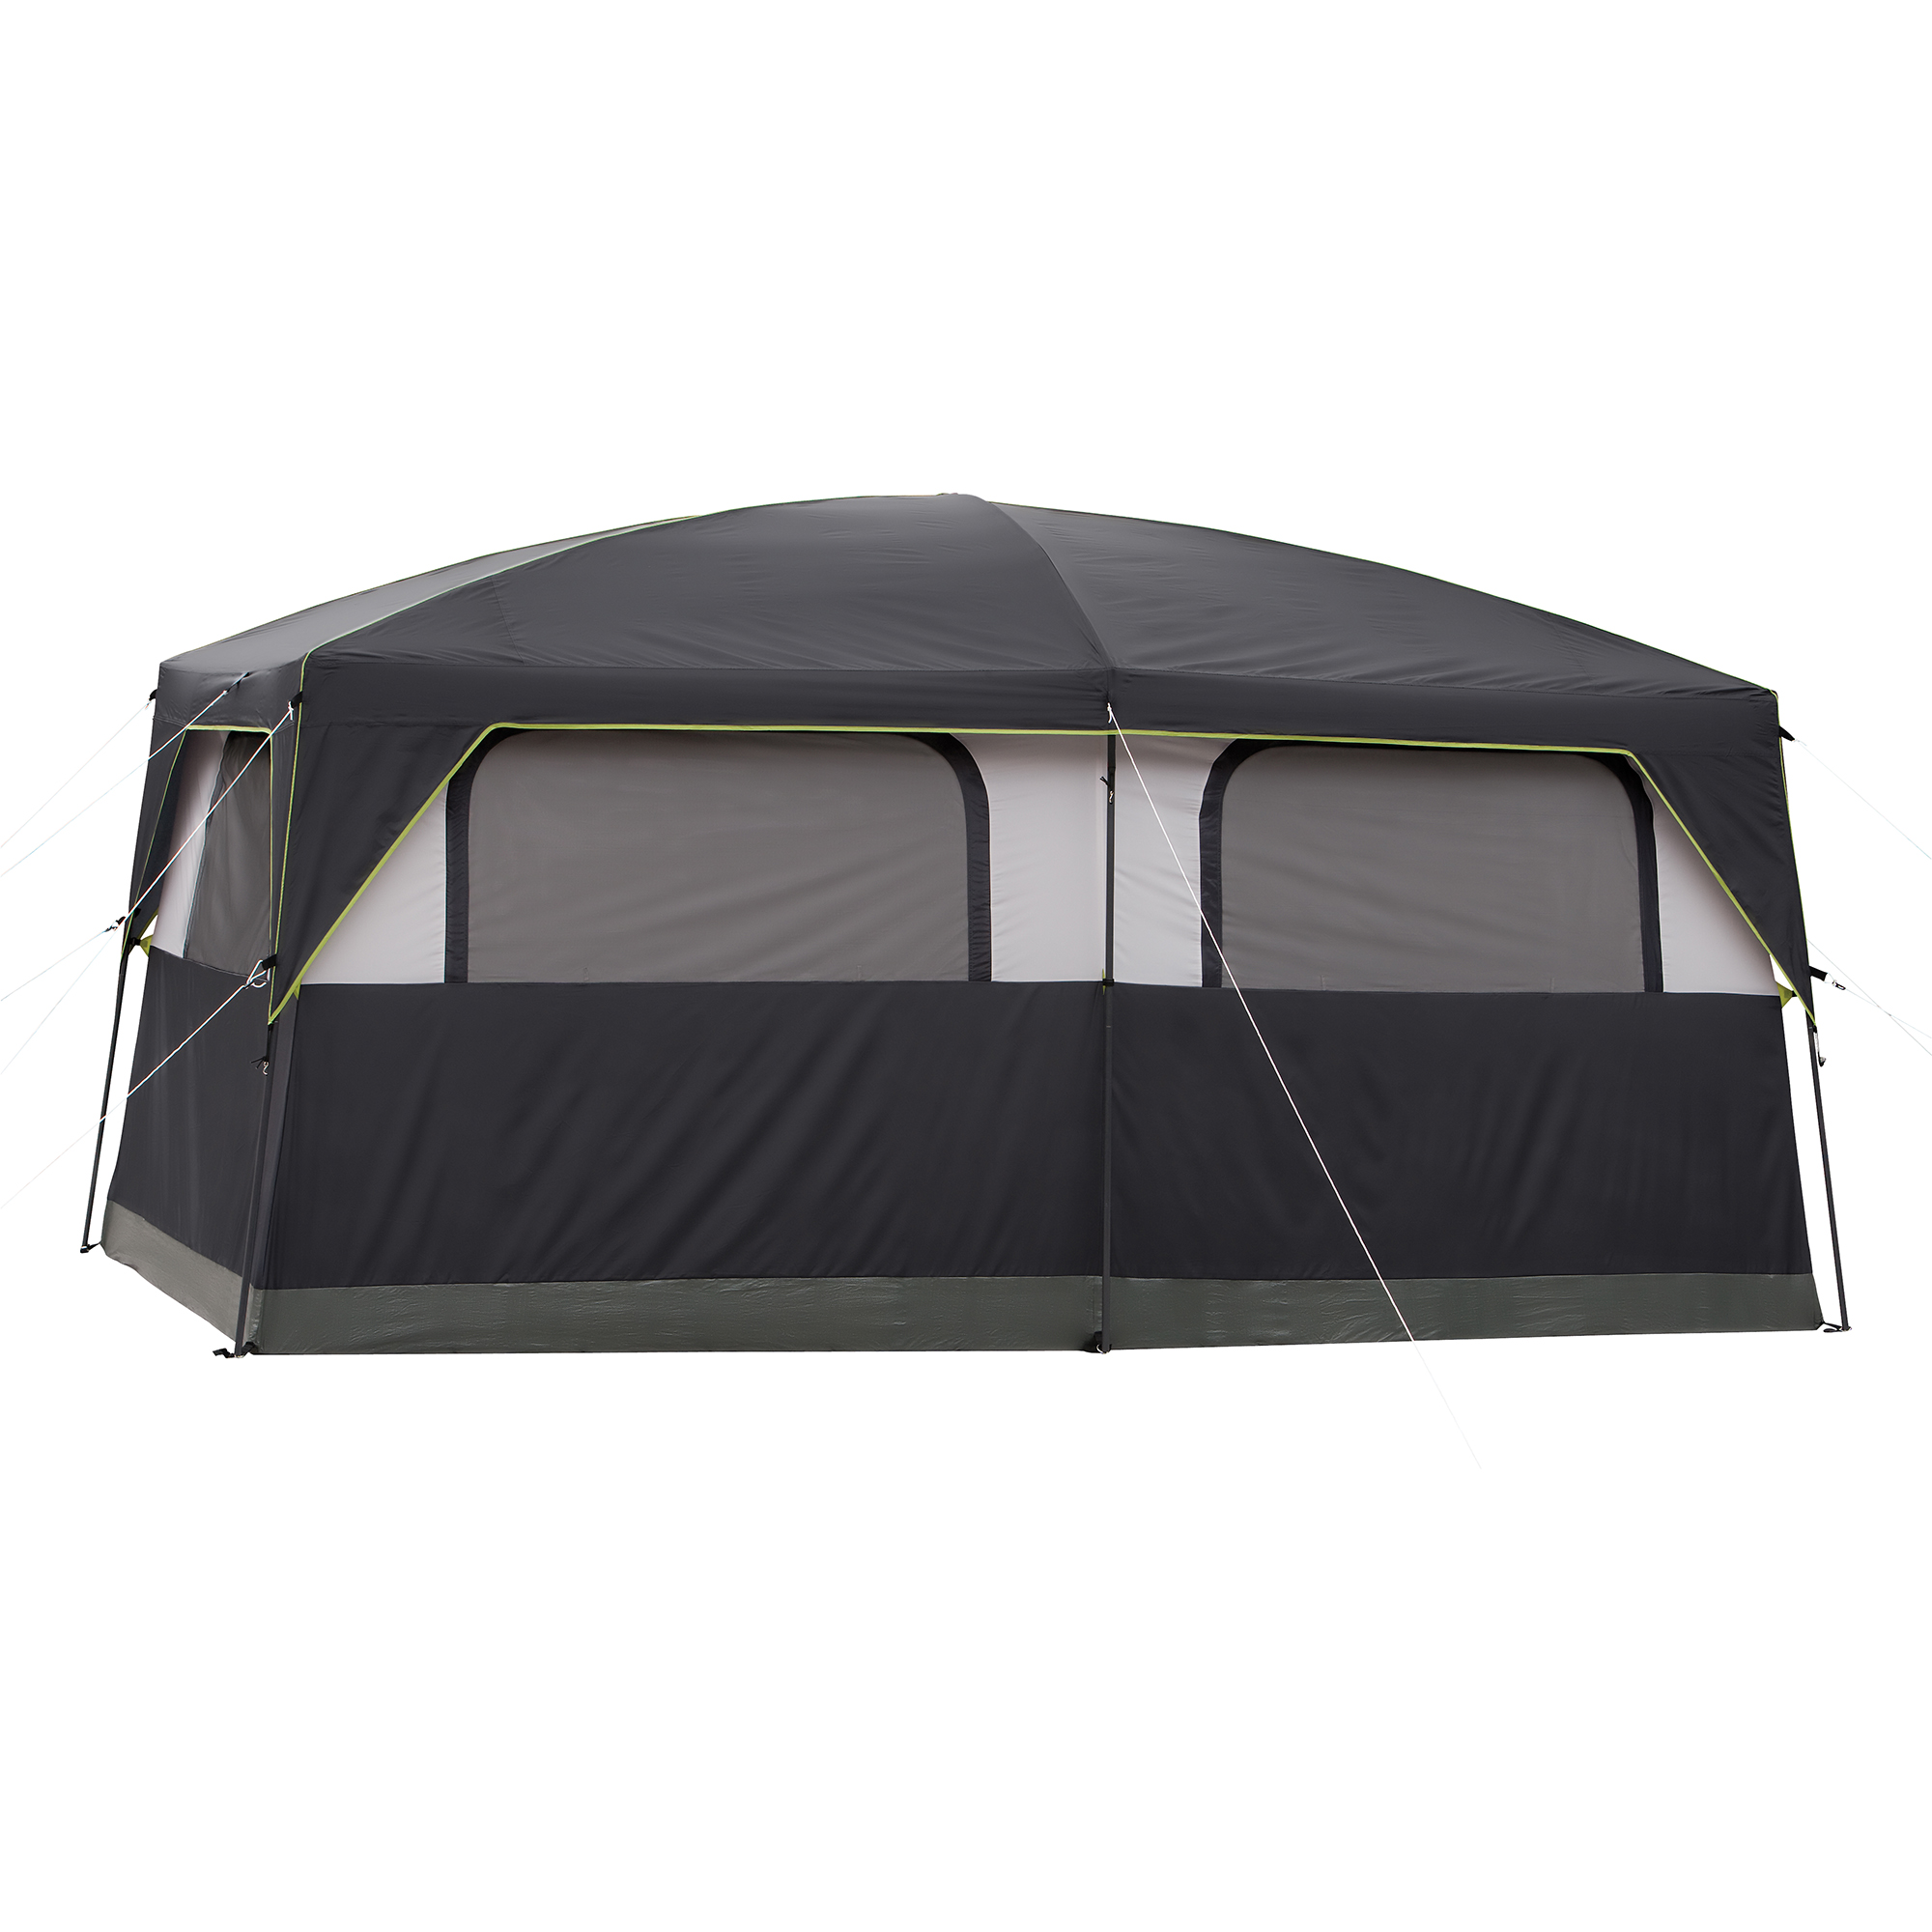 Coleman 8-Person Cabin Tents - image 5 of 7